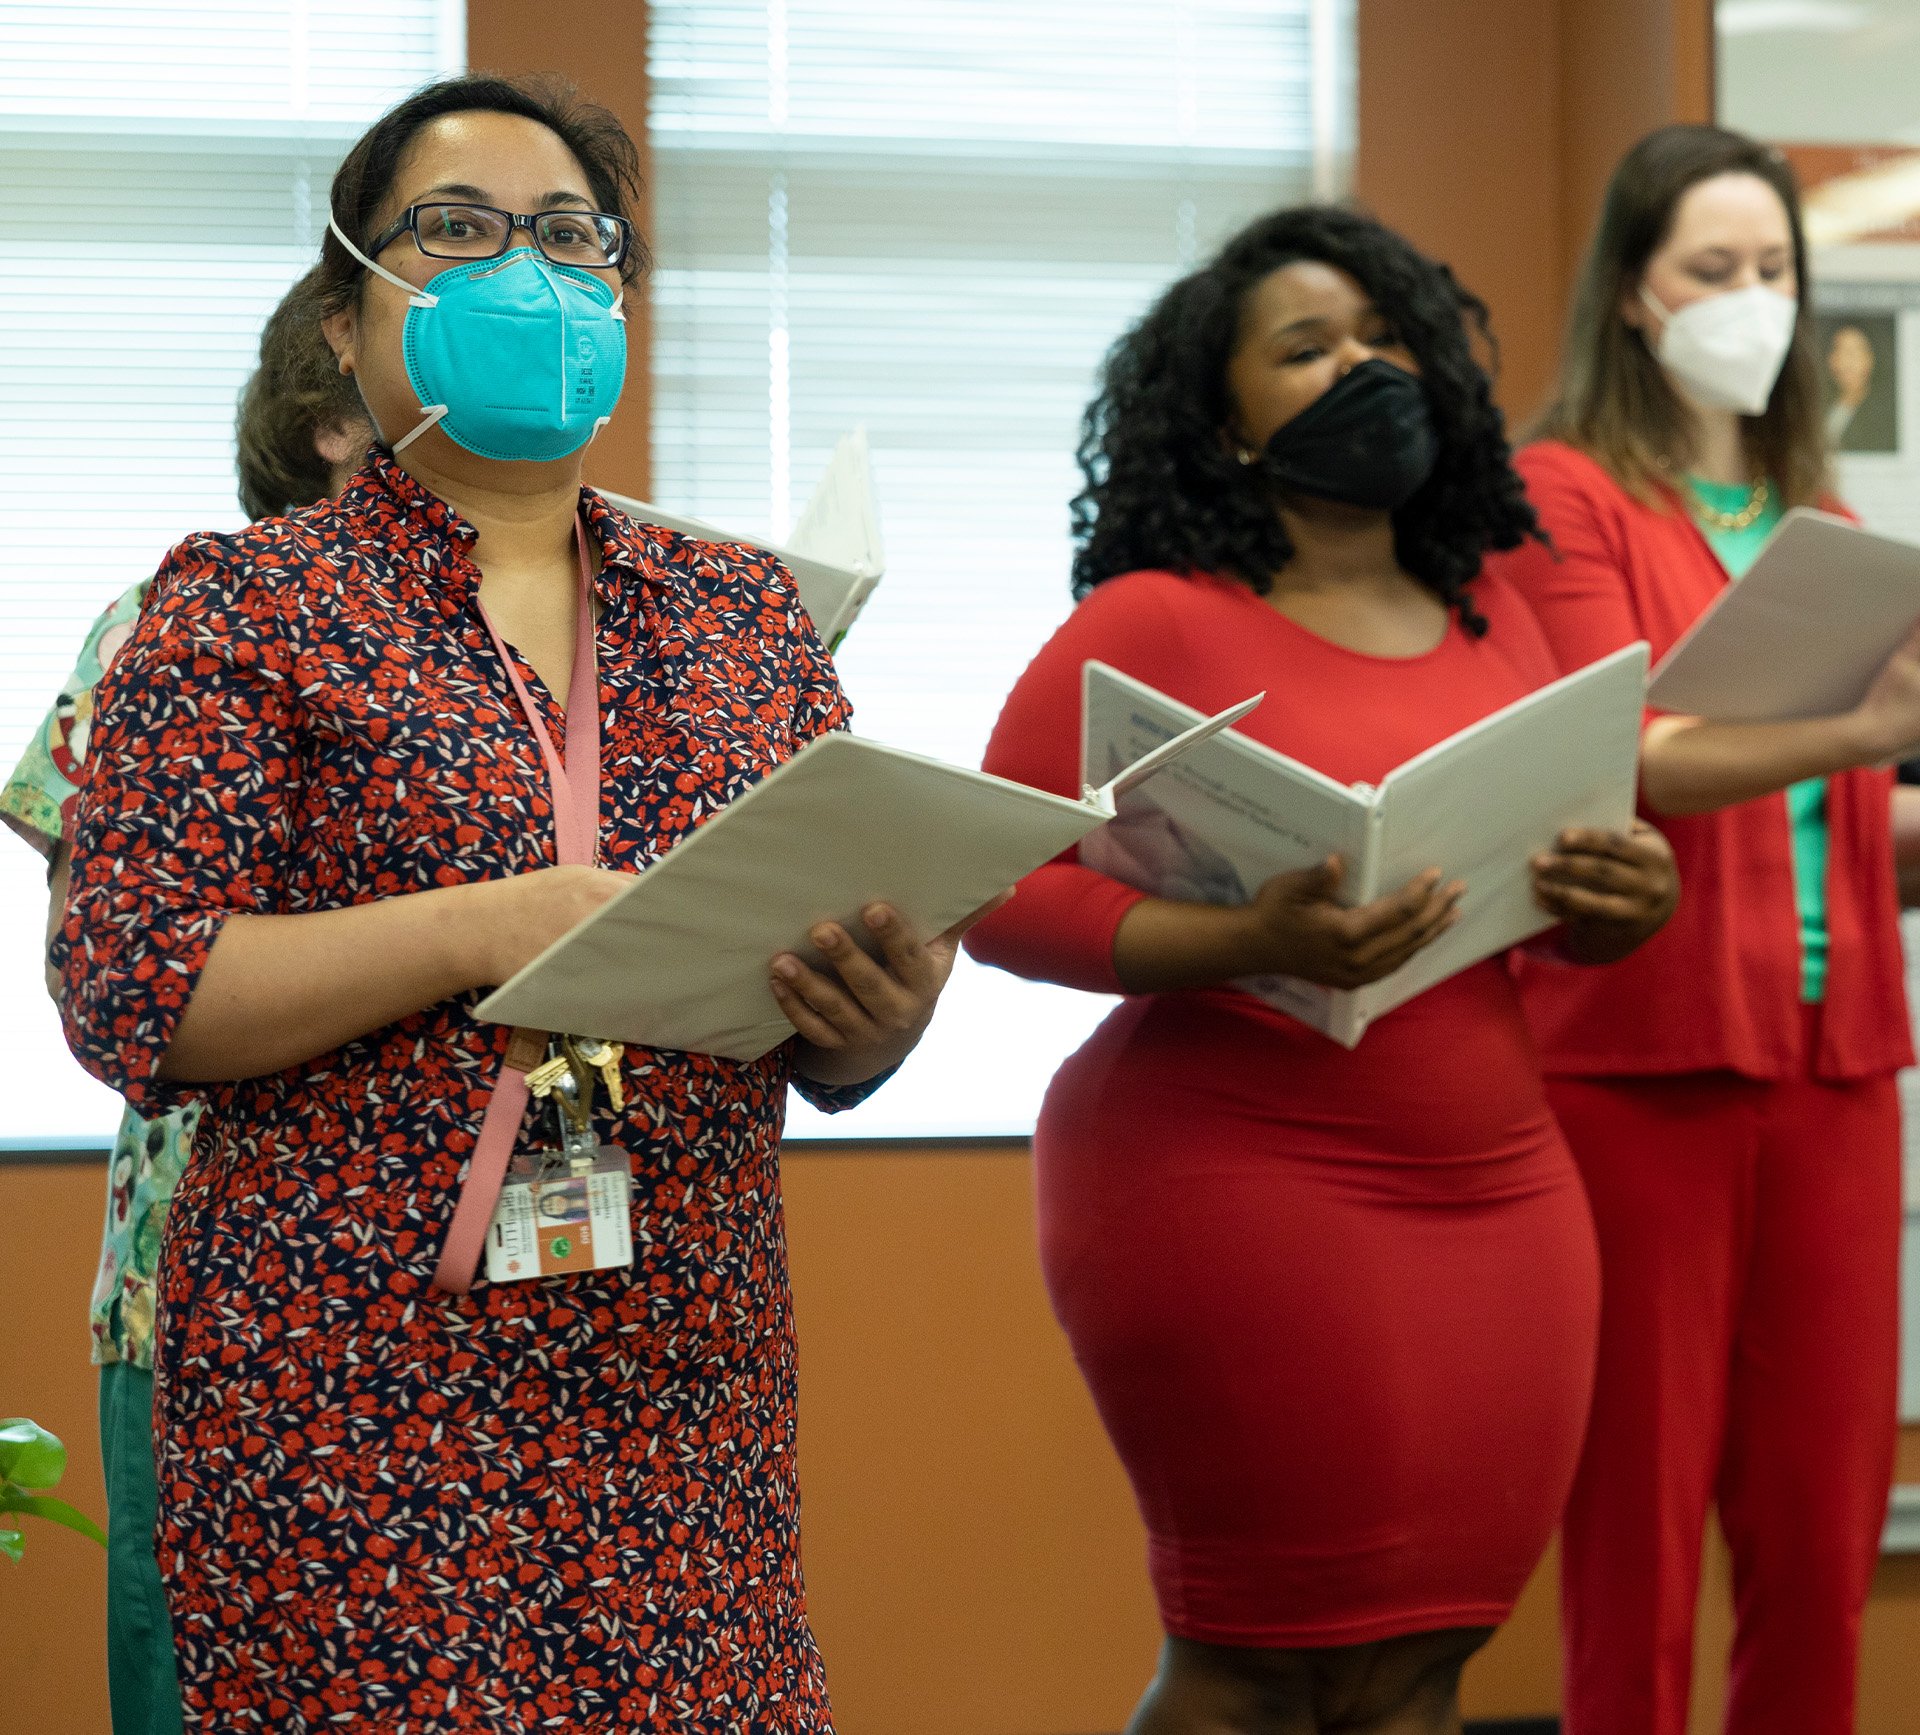 Dr. Michelle Thompson (left) sings with her choirmates, The Lingual Grove, during a holiday concert Friday, Dec. 10, at UTHealth Houston School of Dentistry.